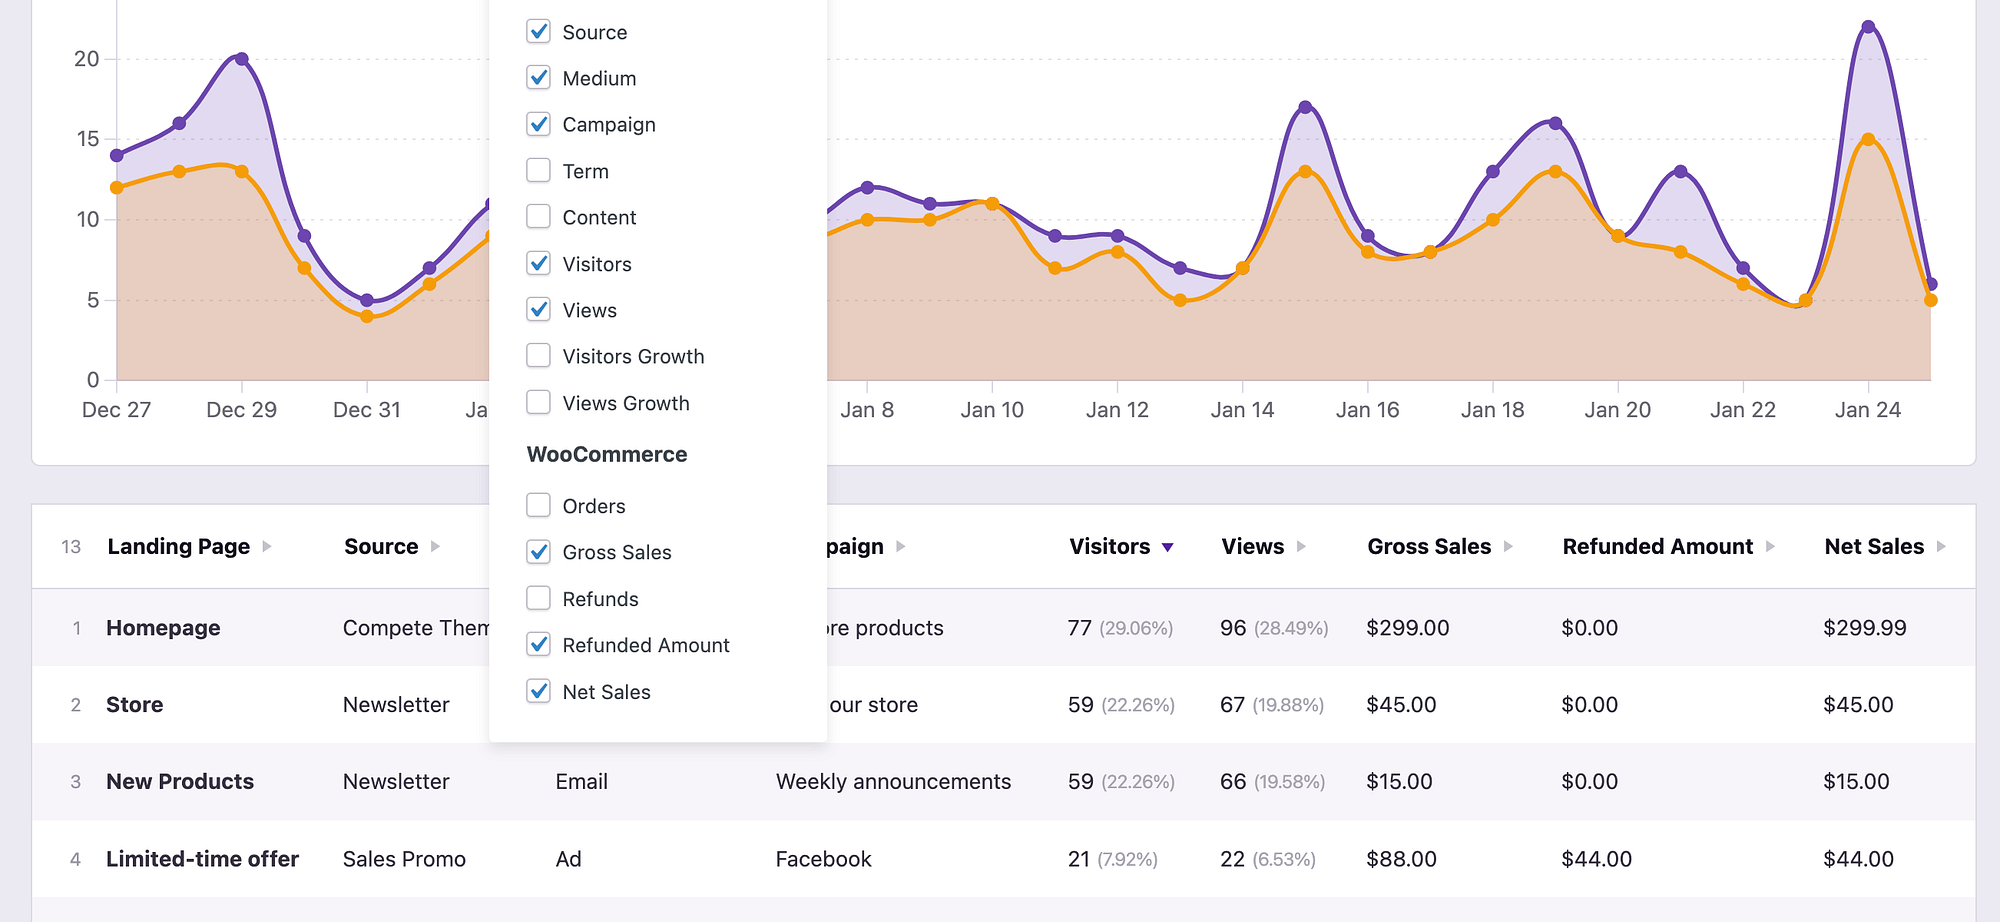 WooCommerce sales data in the Campaigns report